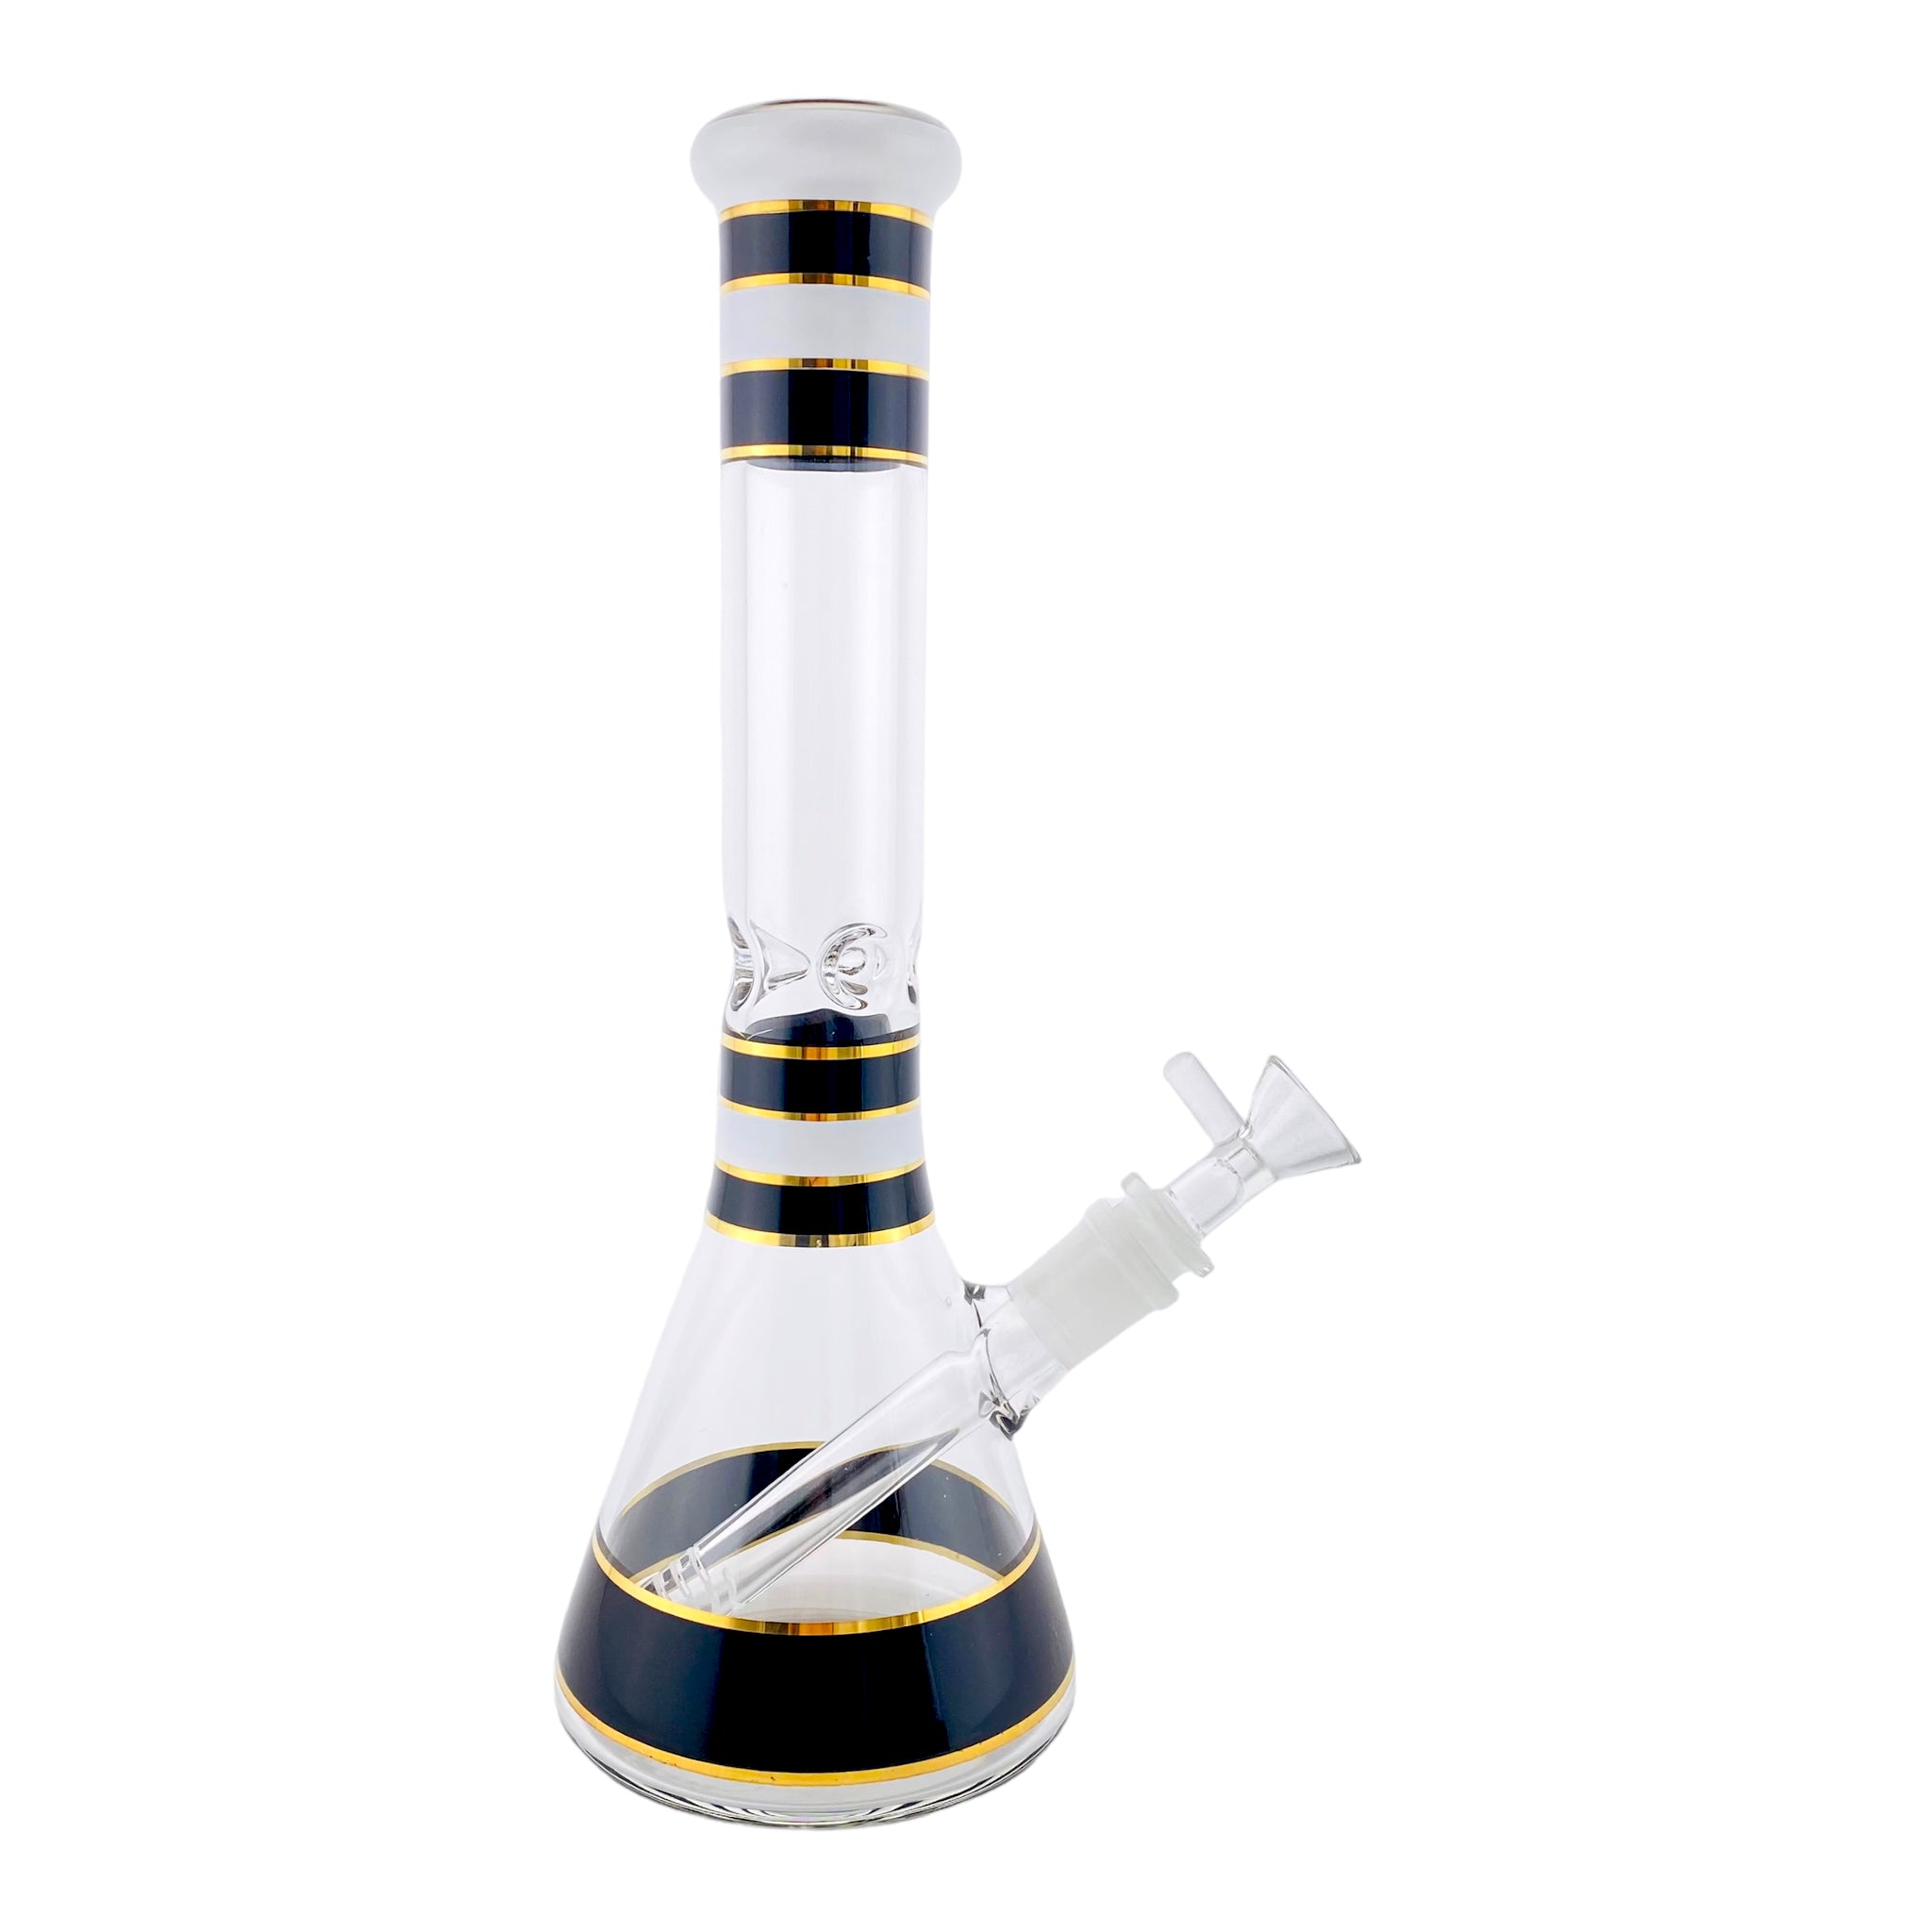 12 Inch Glass Beaker Bong With Black, White, And Gold Accents